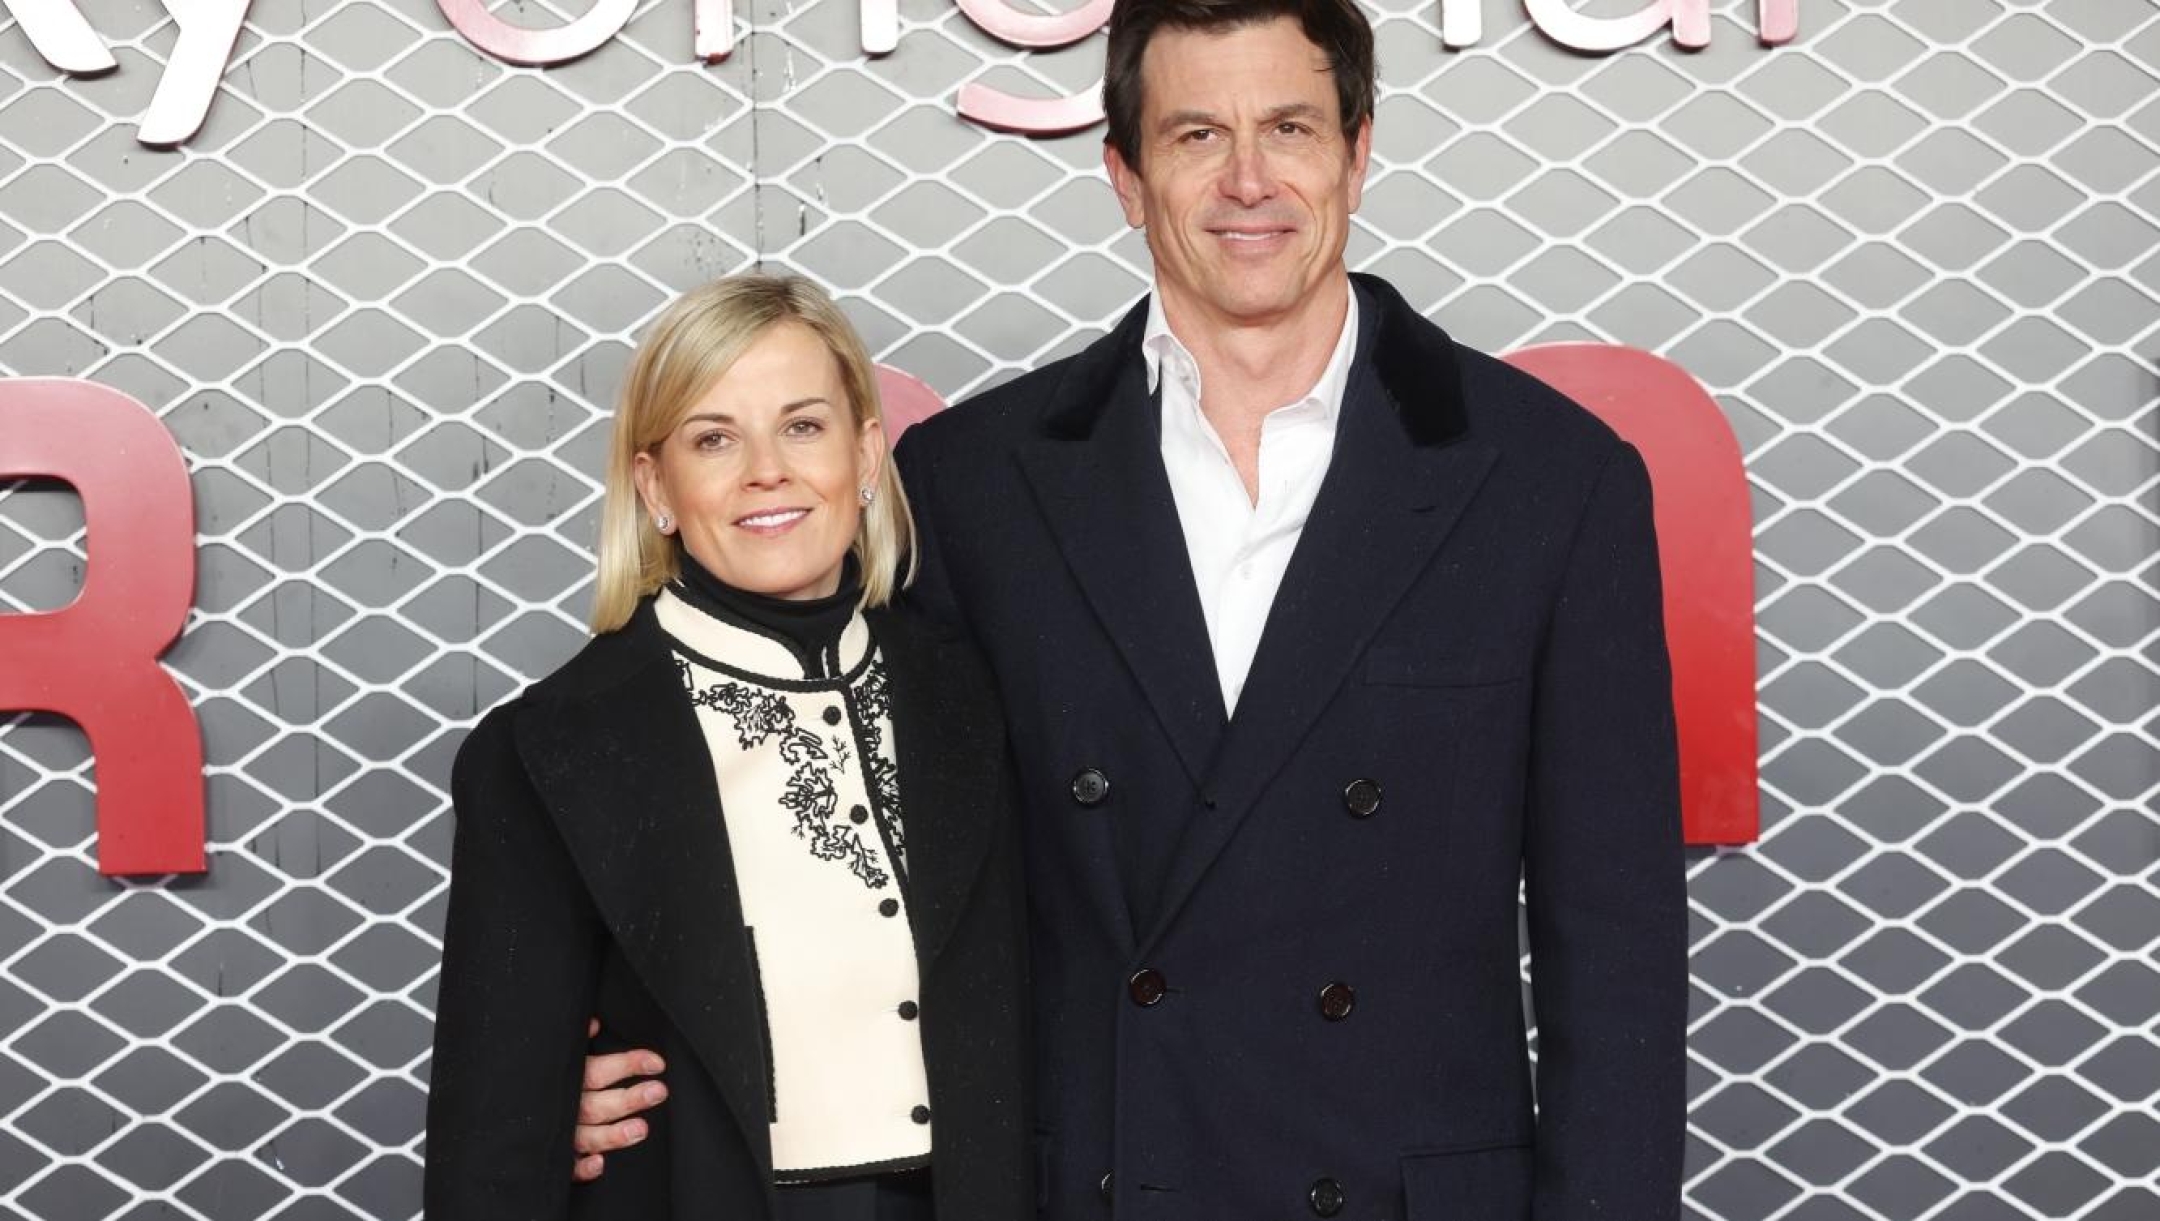 LONDON, ENGLAND - DECEMBER 04: Susie Wolff and Toto Wolff attend the "Ferrari" Sky Premiere at Odeon Luxe Leicester Square on December 04, 2023 in London, England. (Photo by Belinda Jiao/Getty Images)